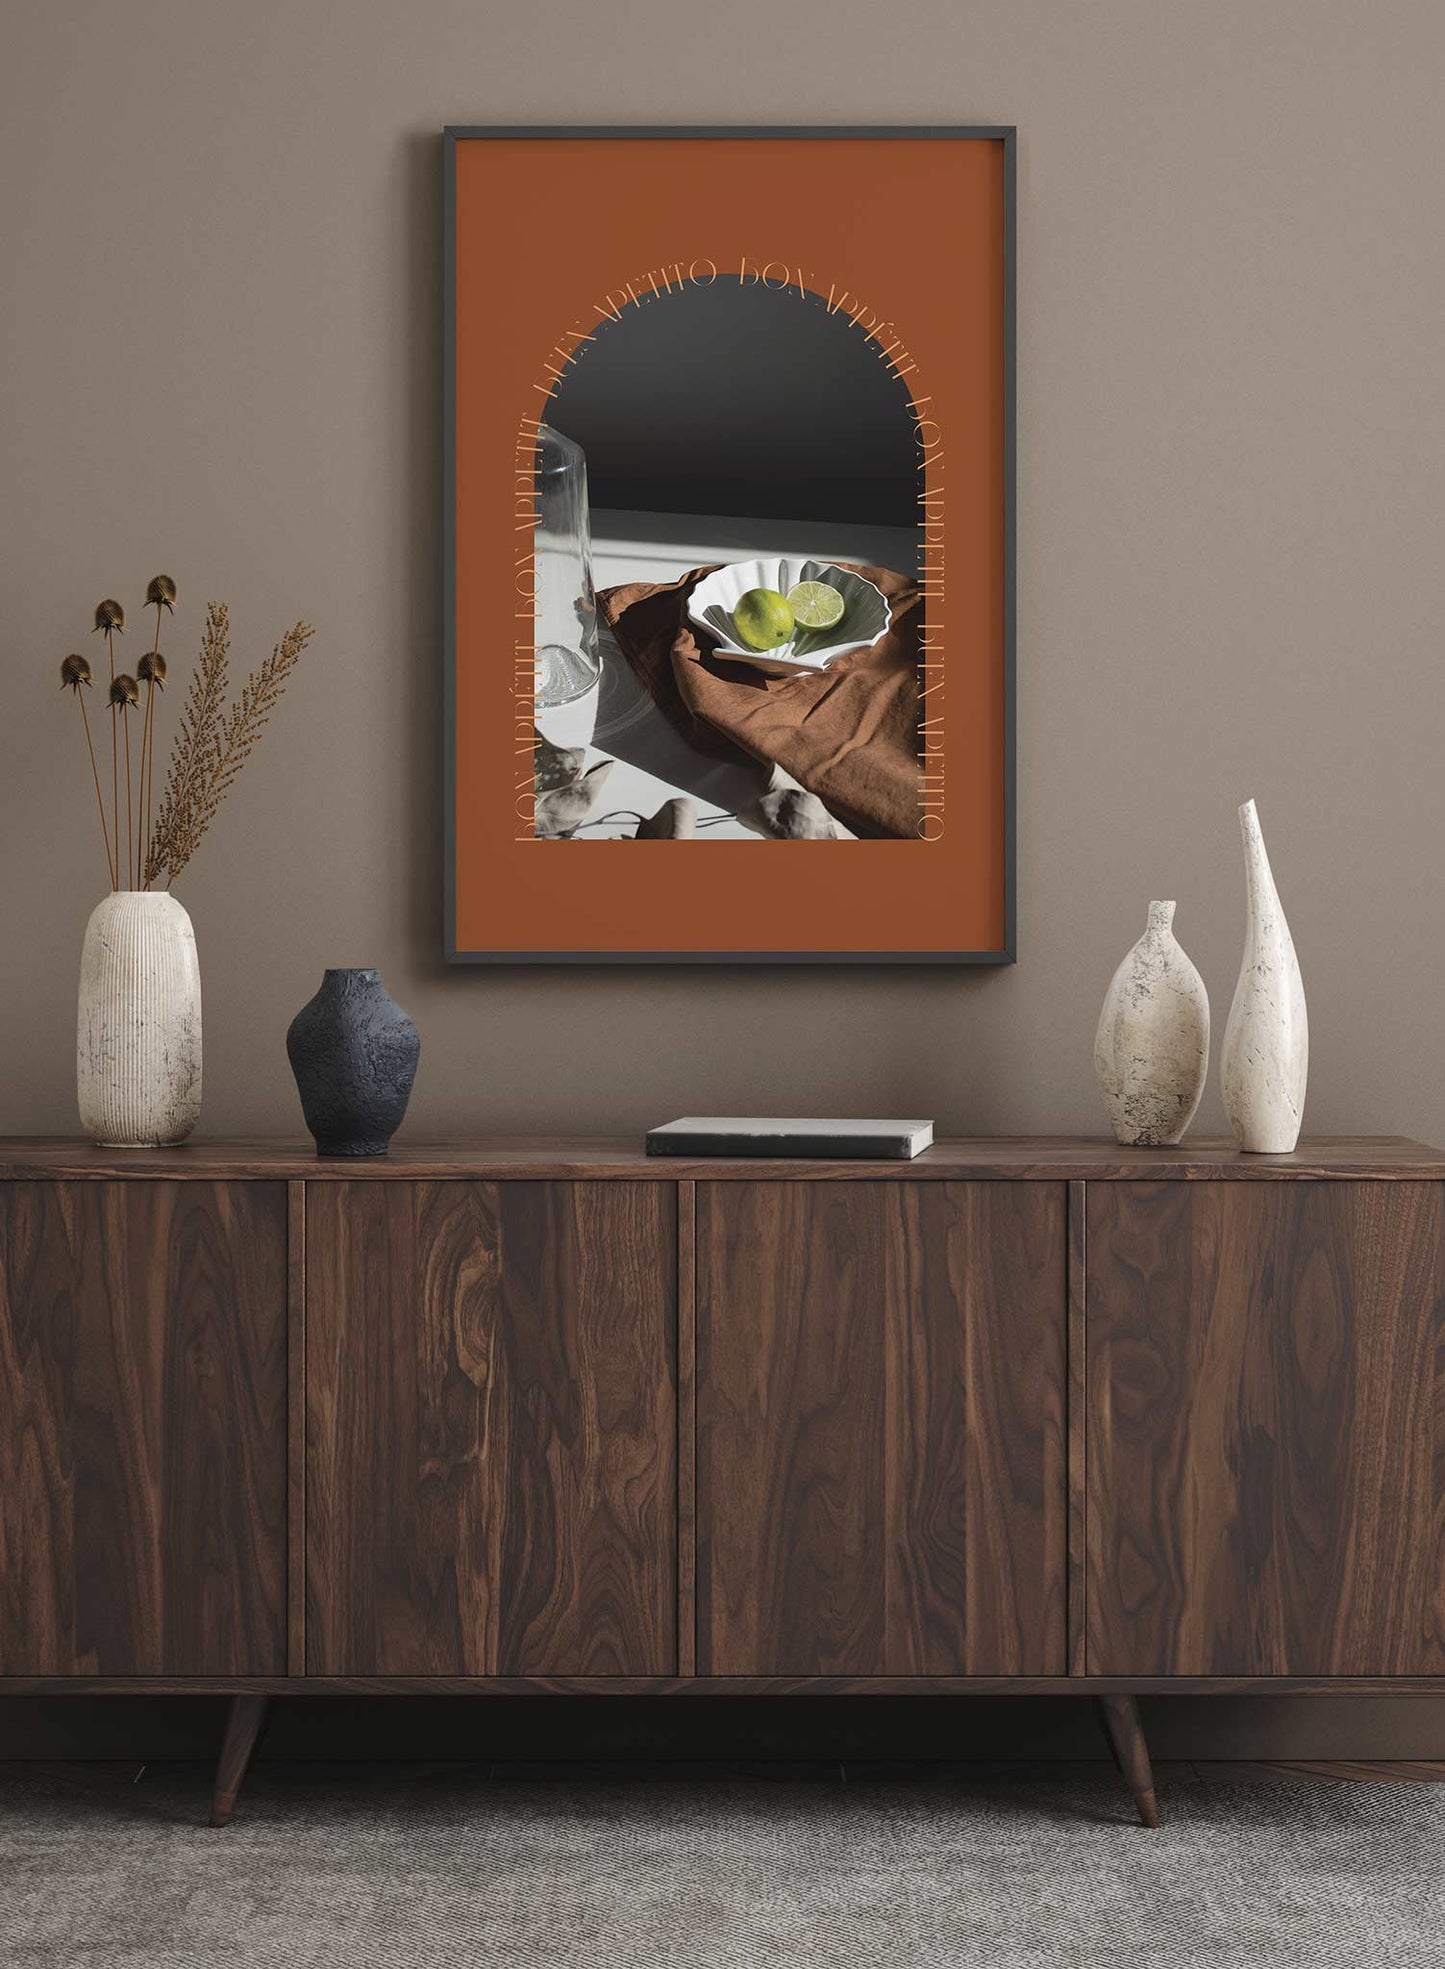 Cosmopolitan Feast is a still life fruit photography collage poster by Opposite Wall.